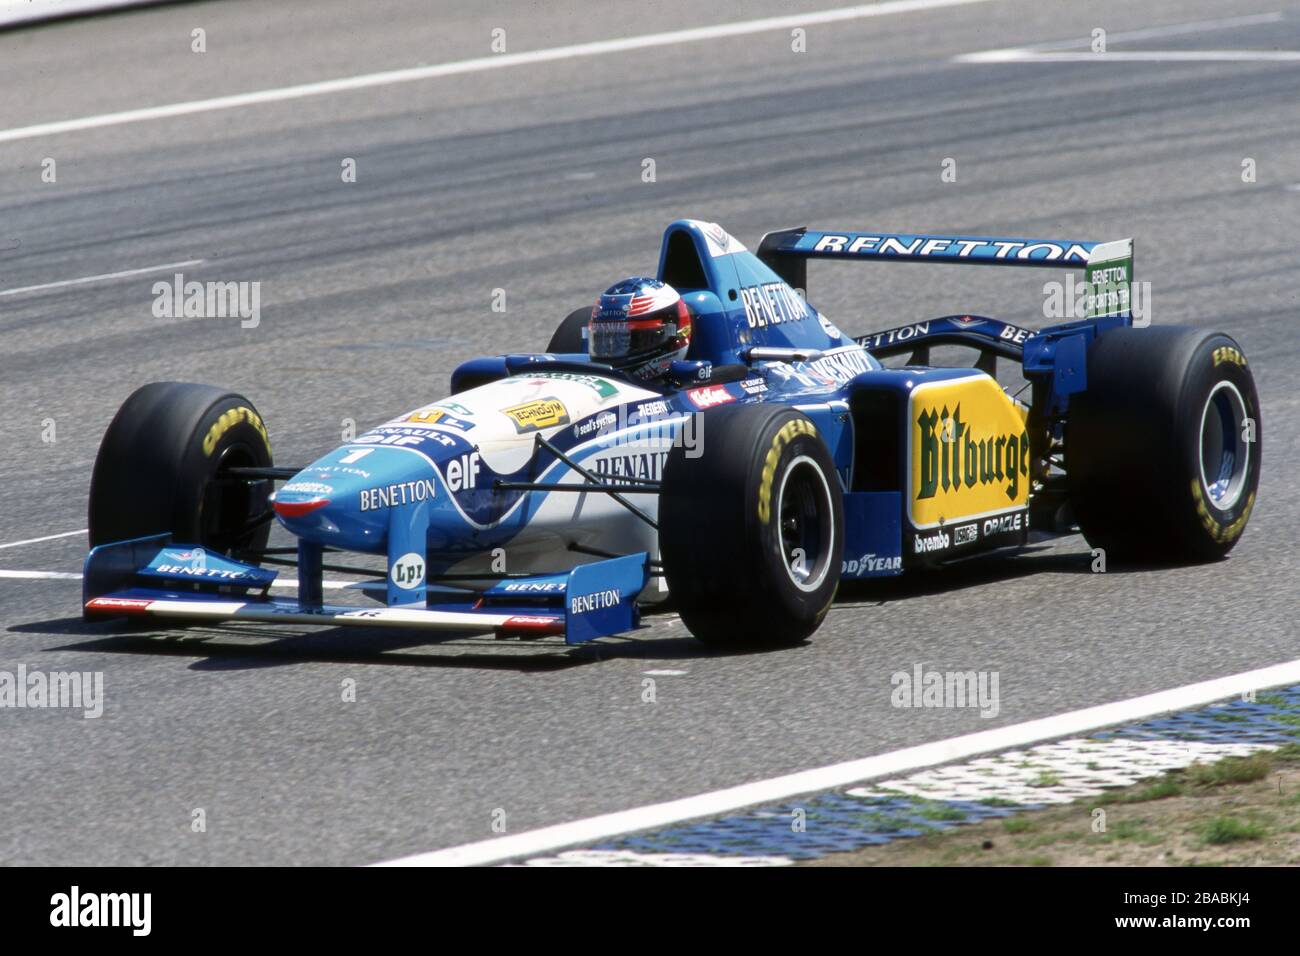 Michael Schumacher Benetton Car High Resolution Stock Photography And Images Alamy